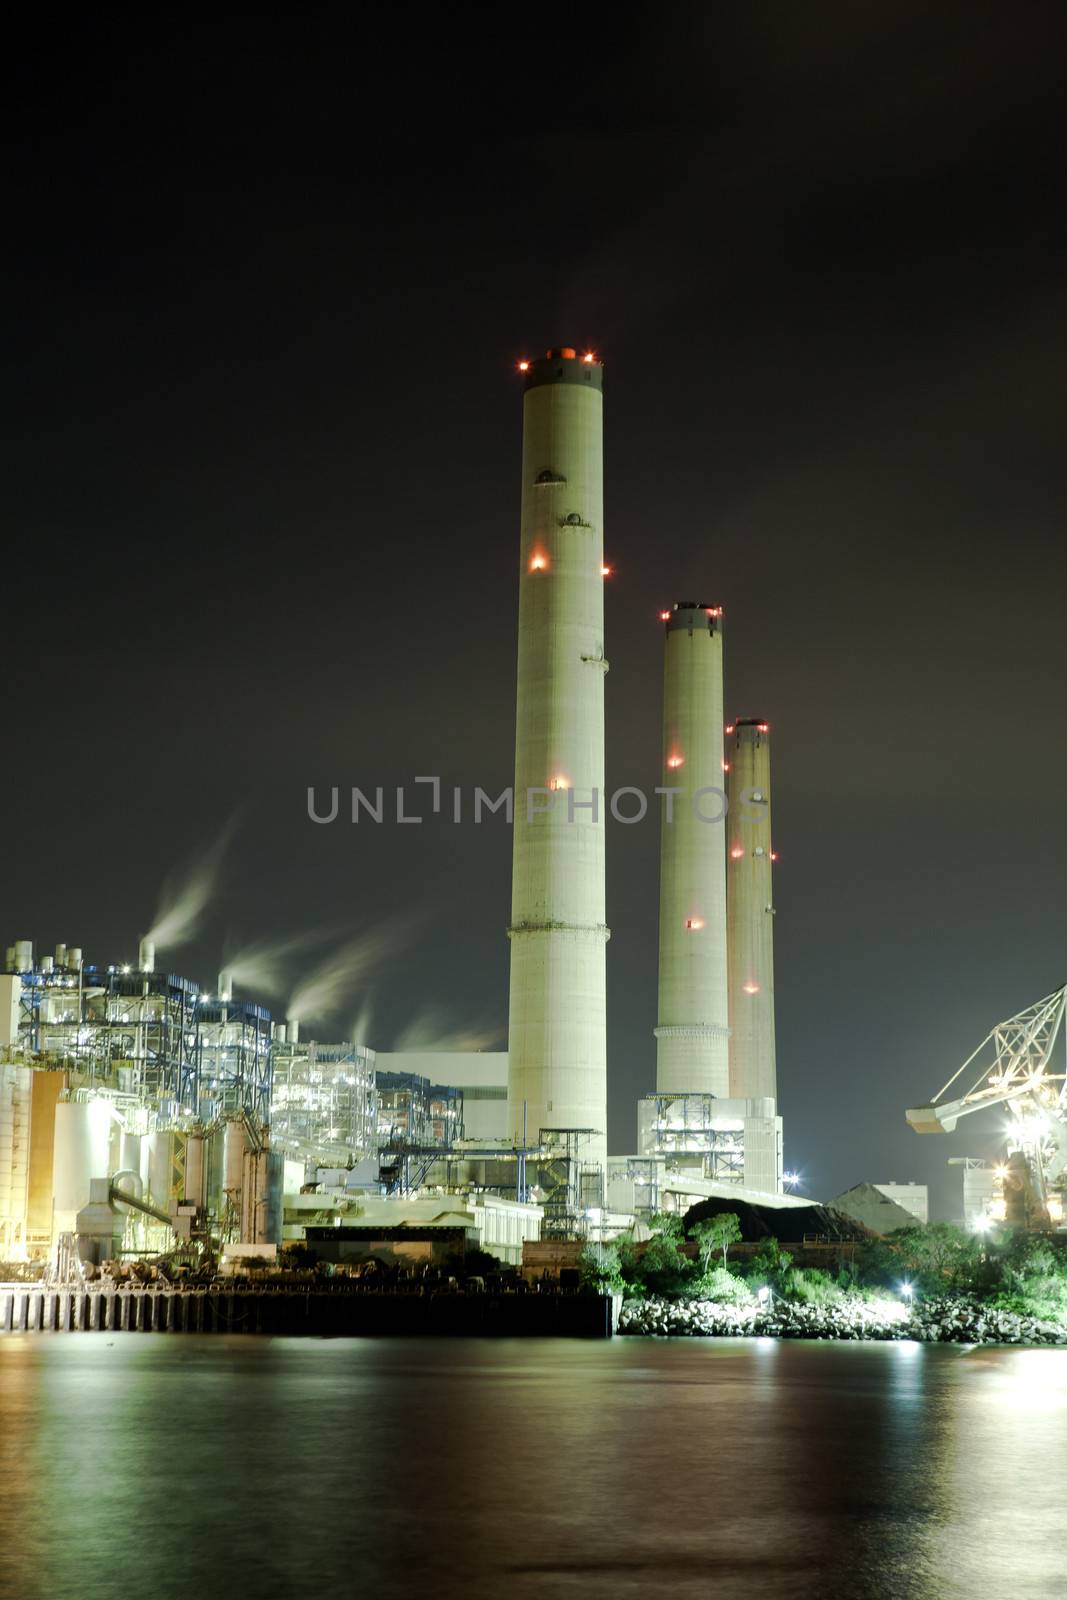 Gas plant at night